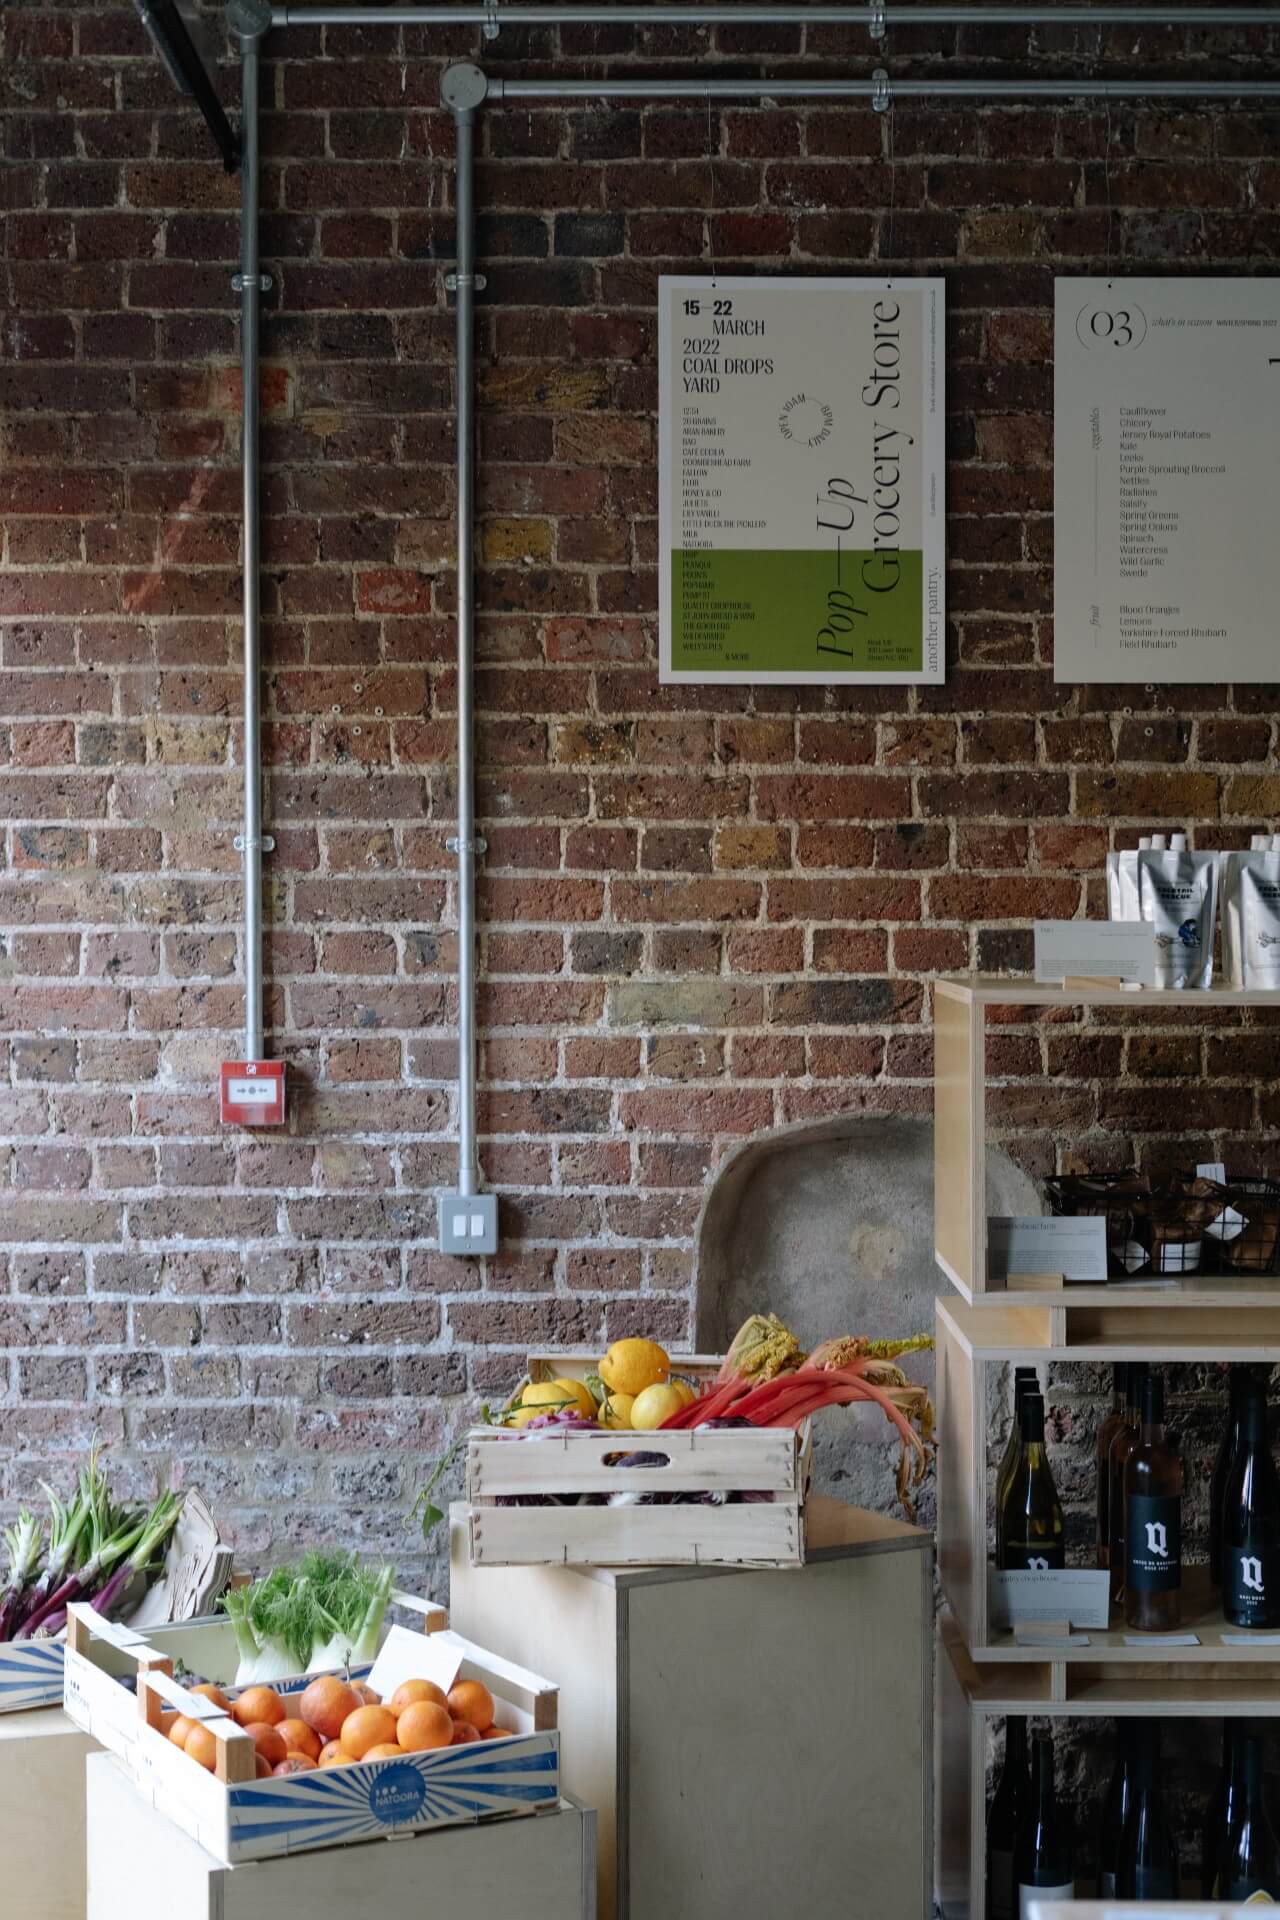 Independent Another Pantry food pop up shop in London with fresh fruit and vegetables on light wooden shelves and exposed brickwork